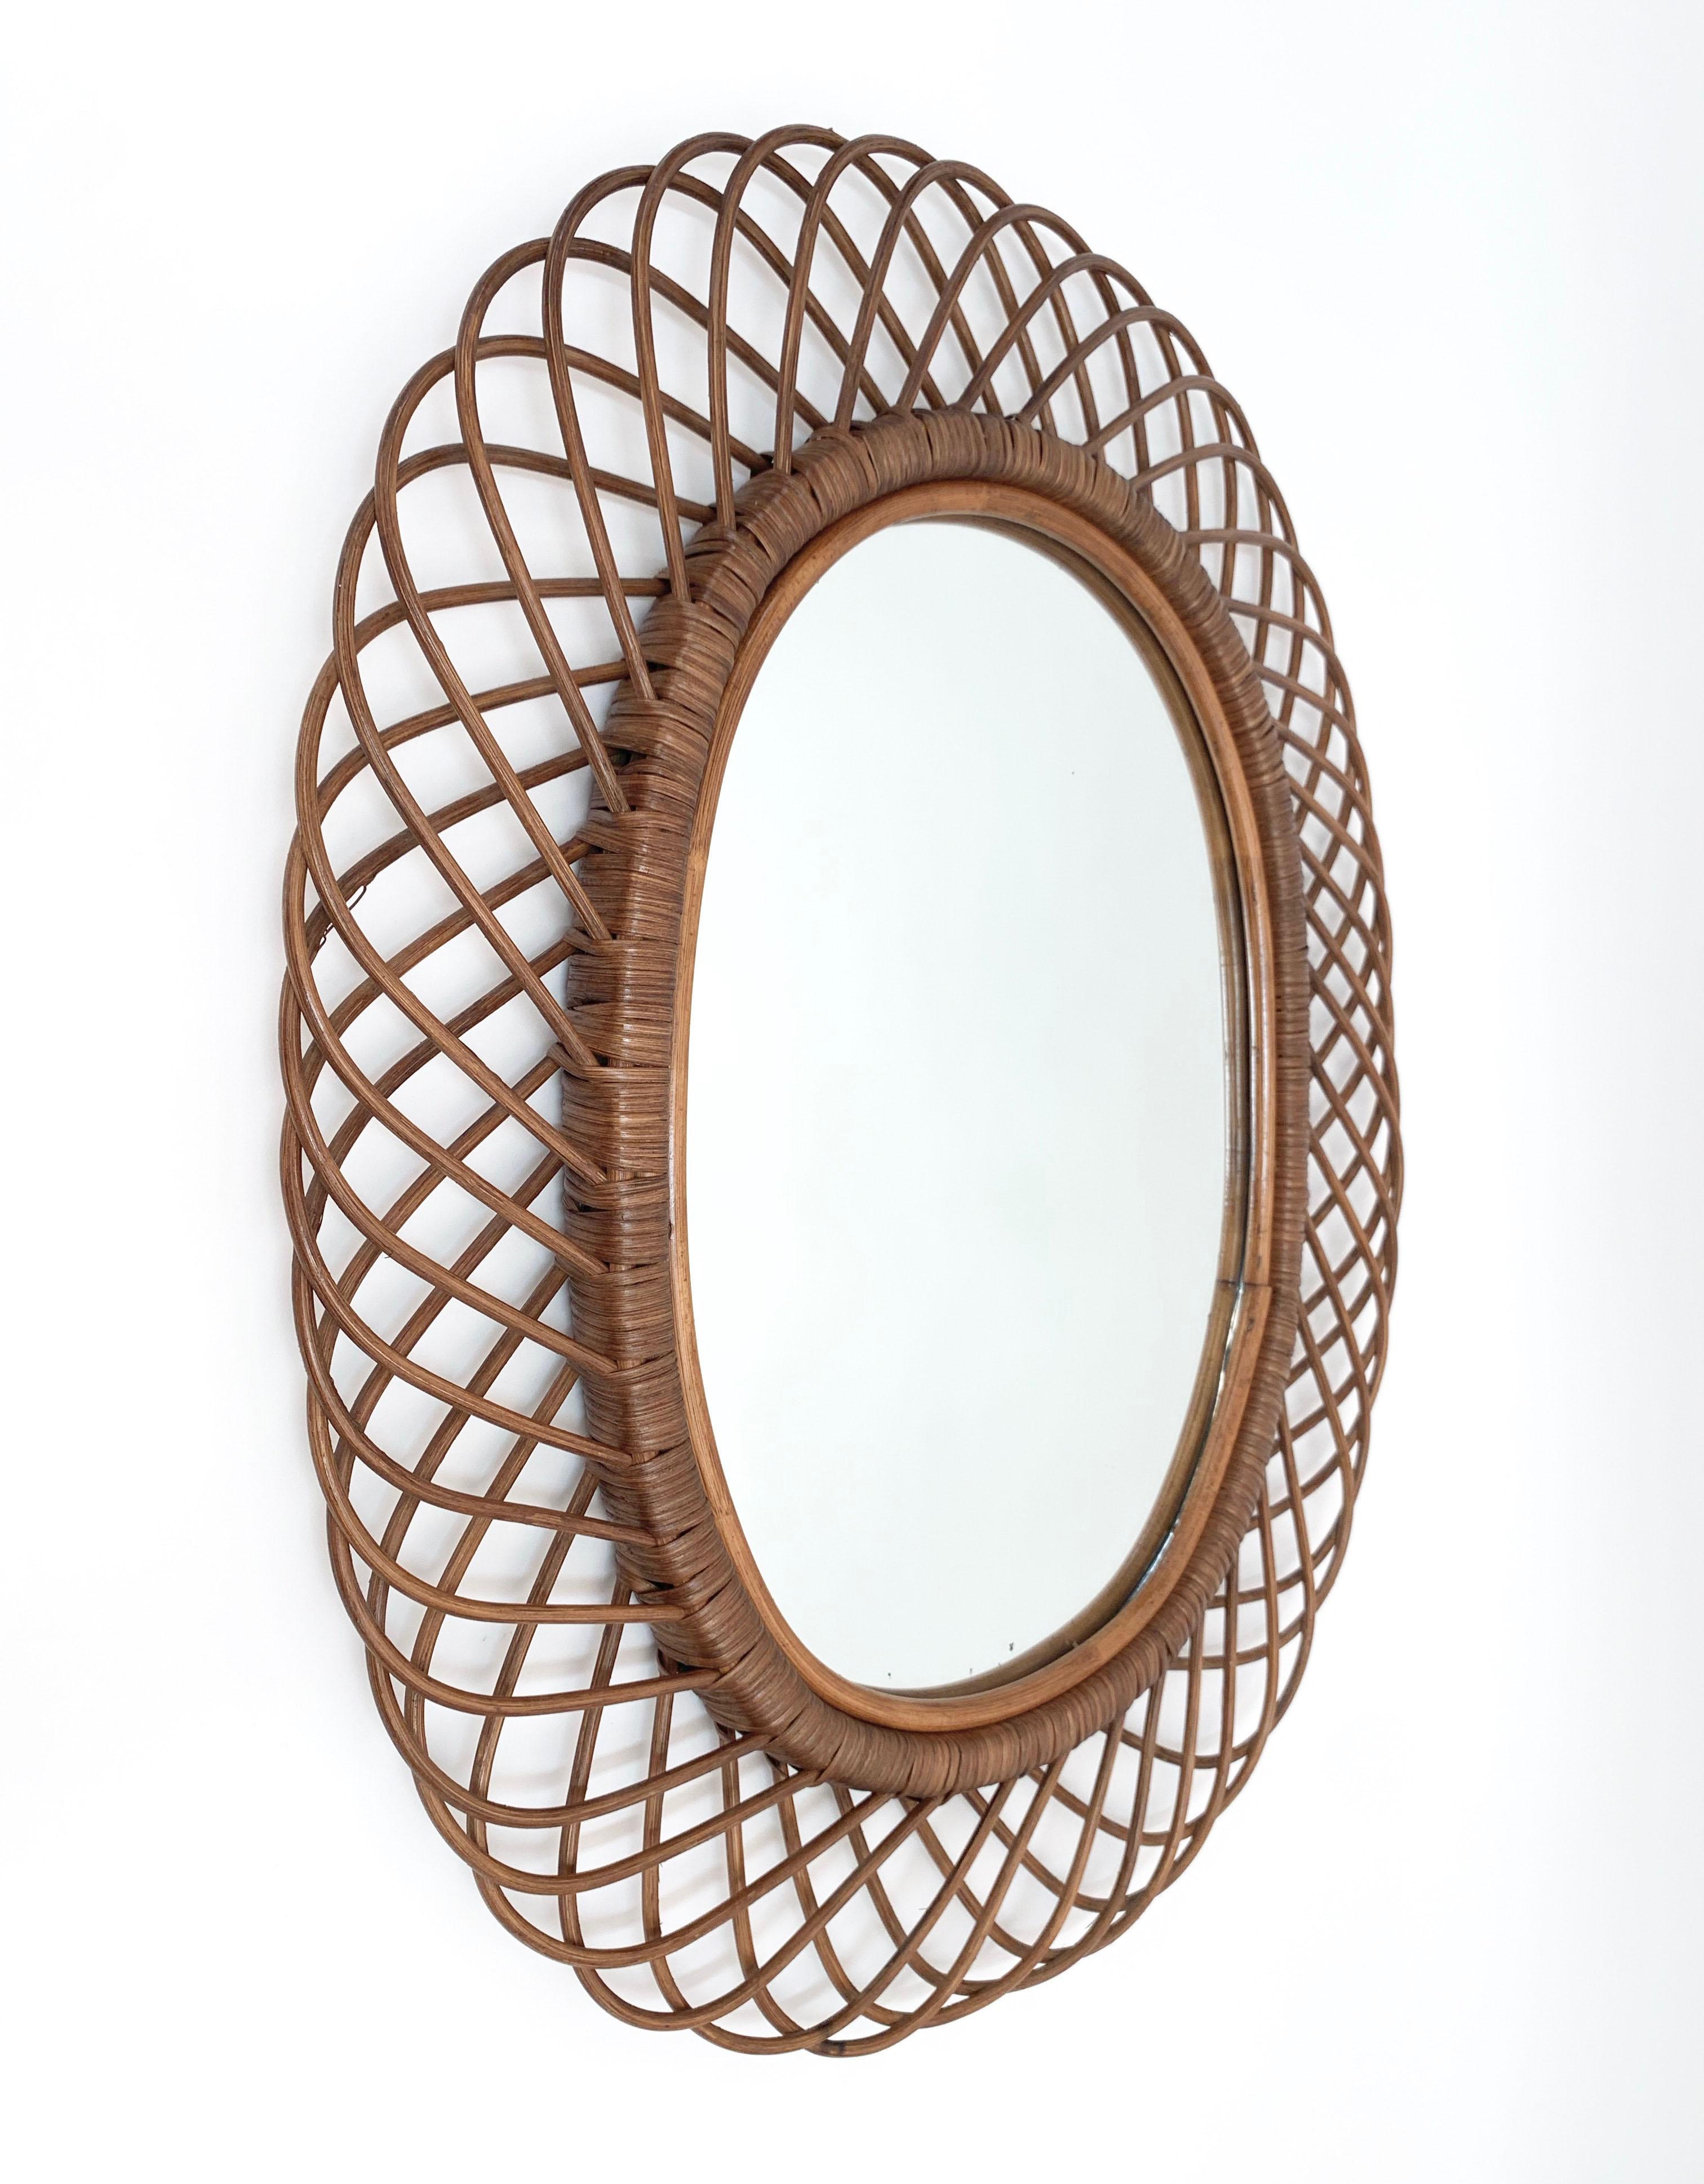 Midcentury French Riviera Curved Rattan and Bamboo Italian Oval Mirror, 1960s 2